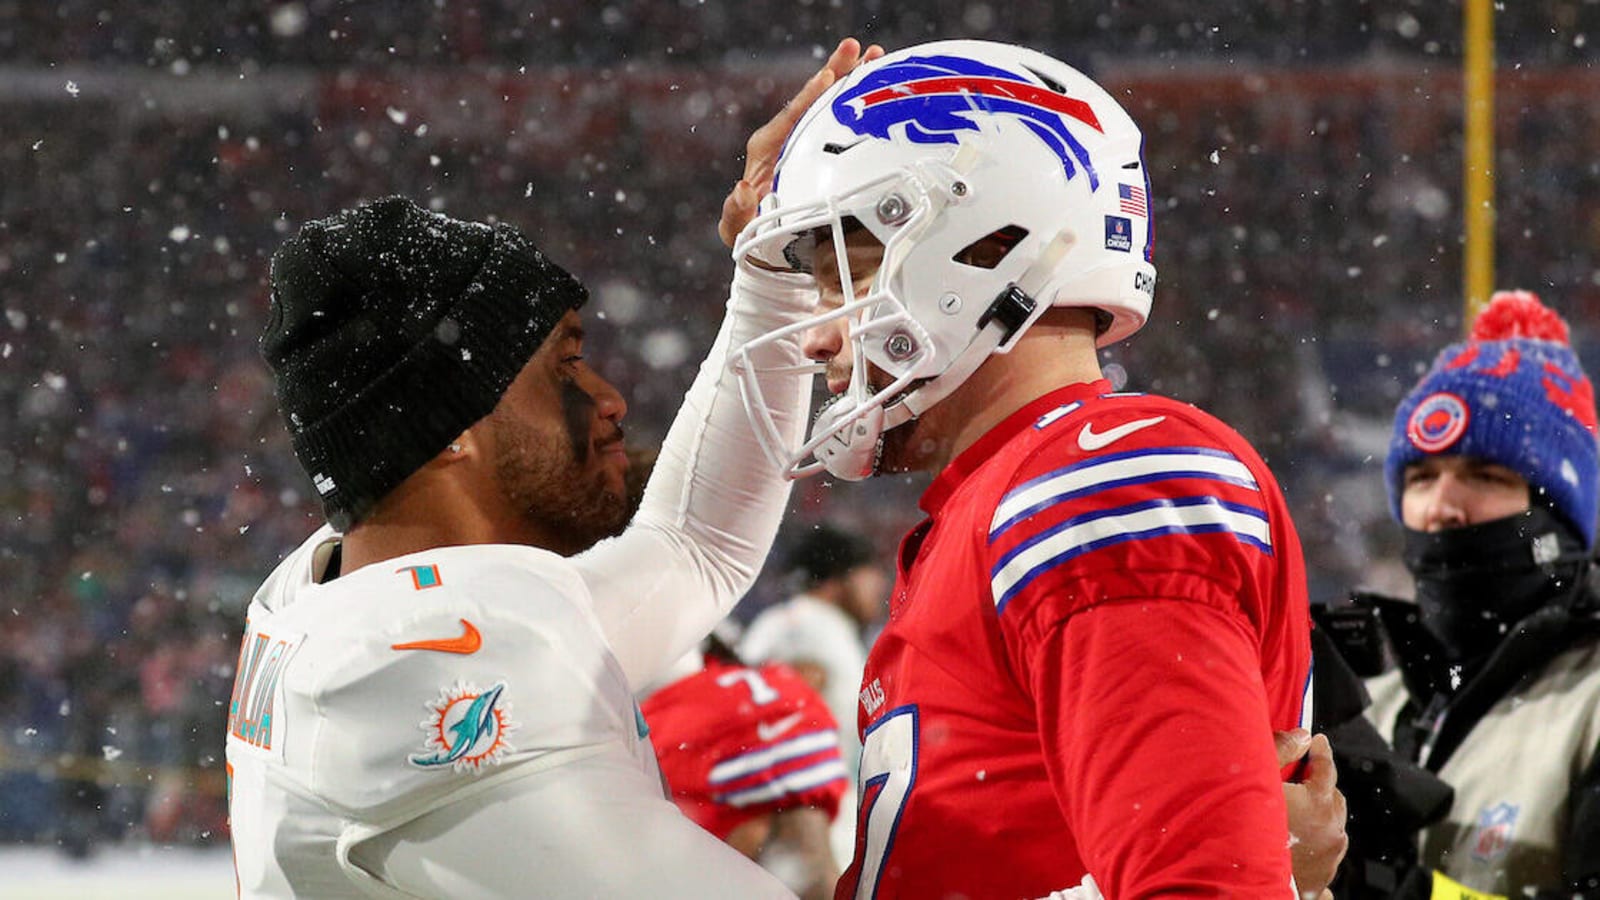 Buffalo Bills, Miami Dolphins to face off in Week 2 Thursday Night Football game